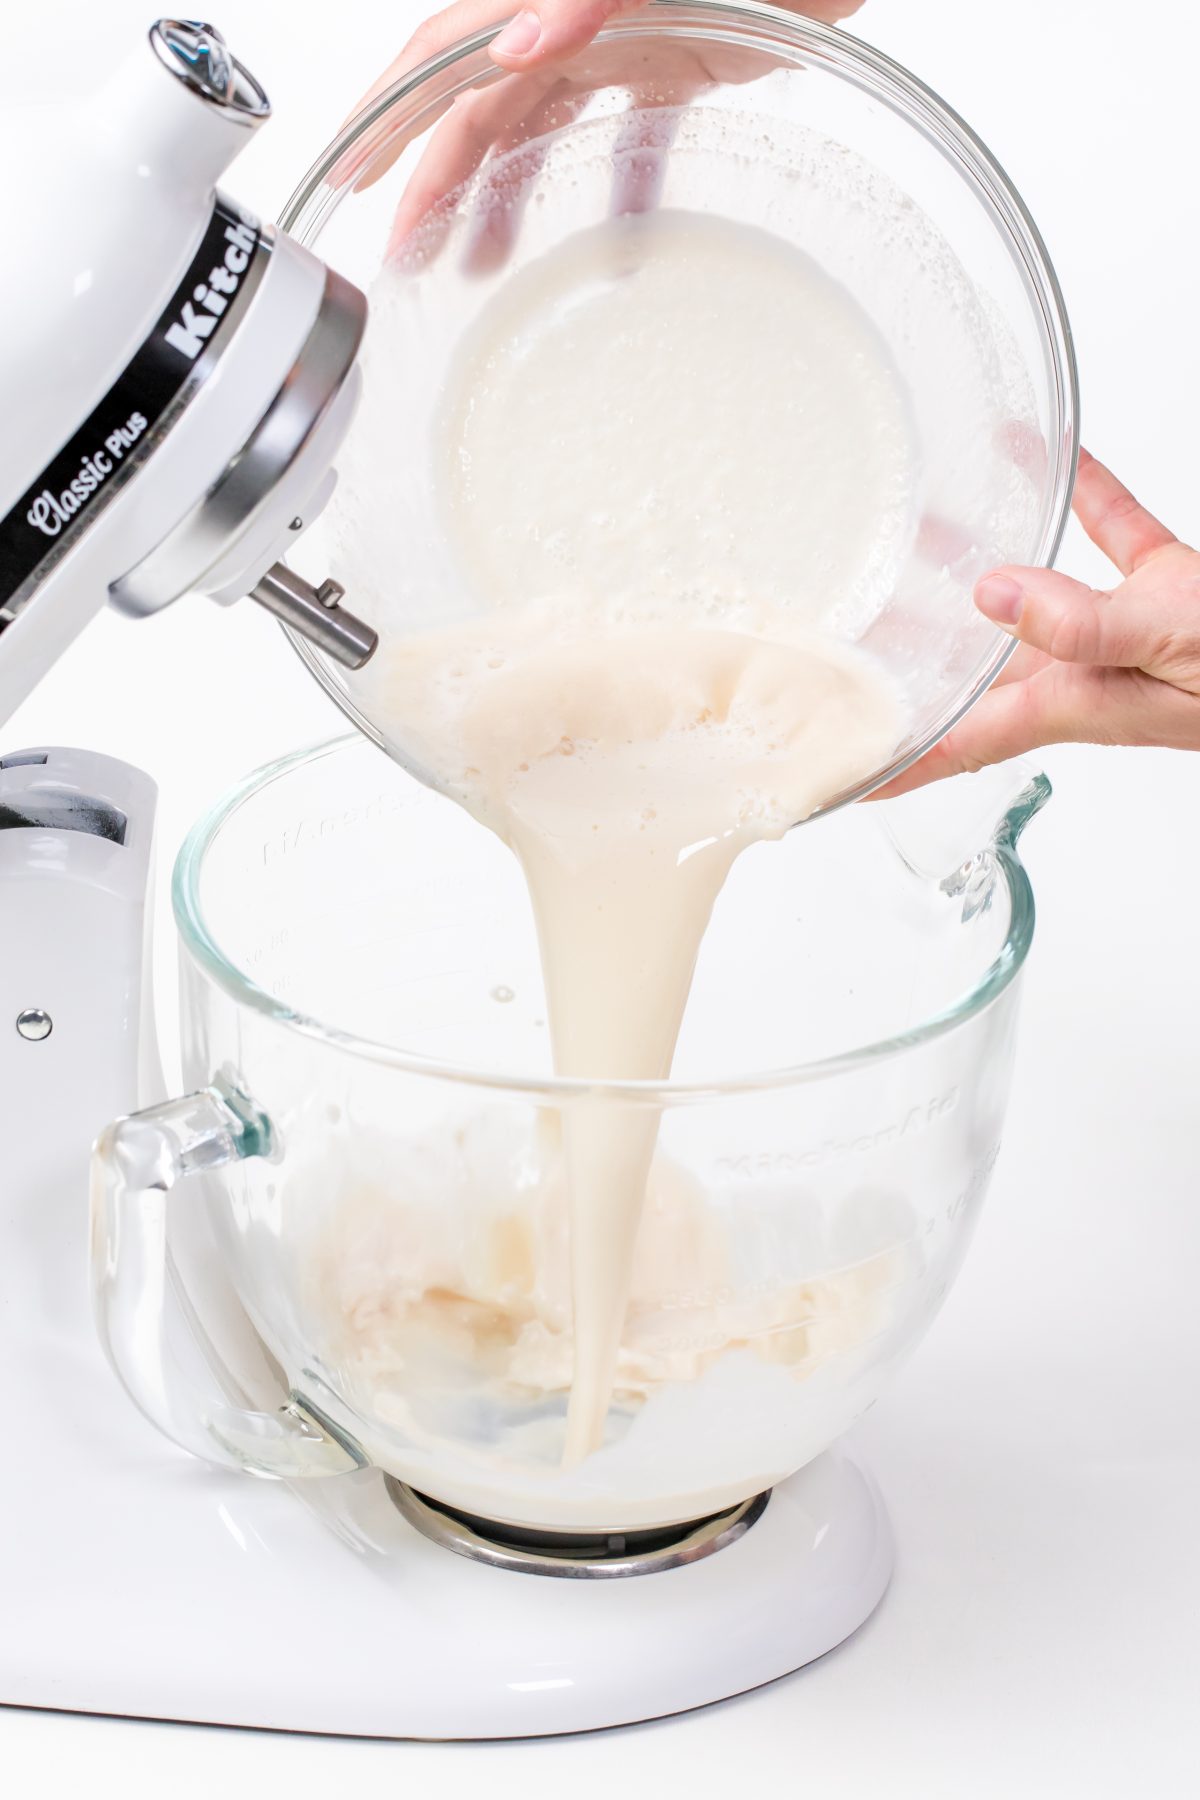 pour yeast mixture into mixing bowl